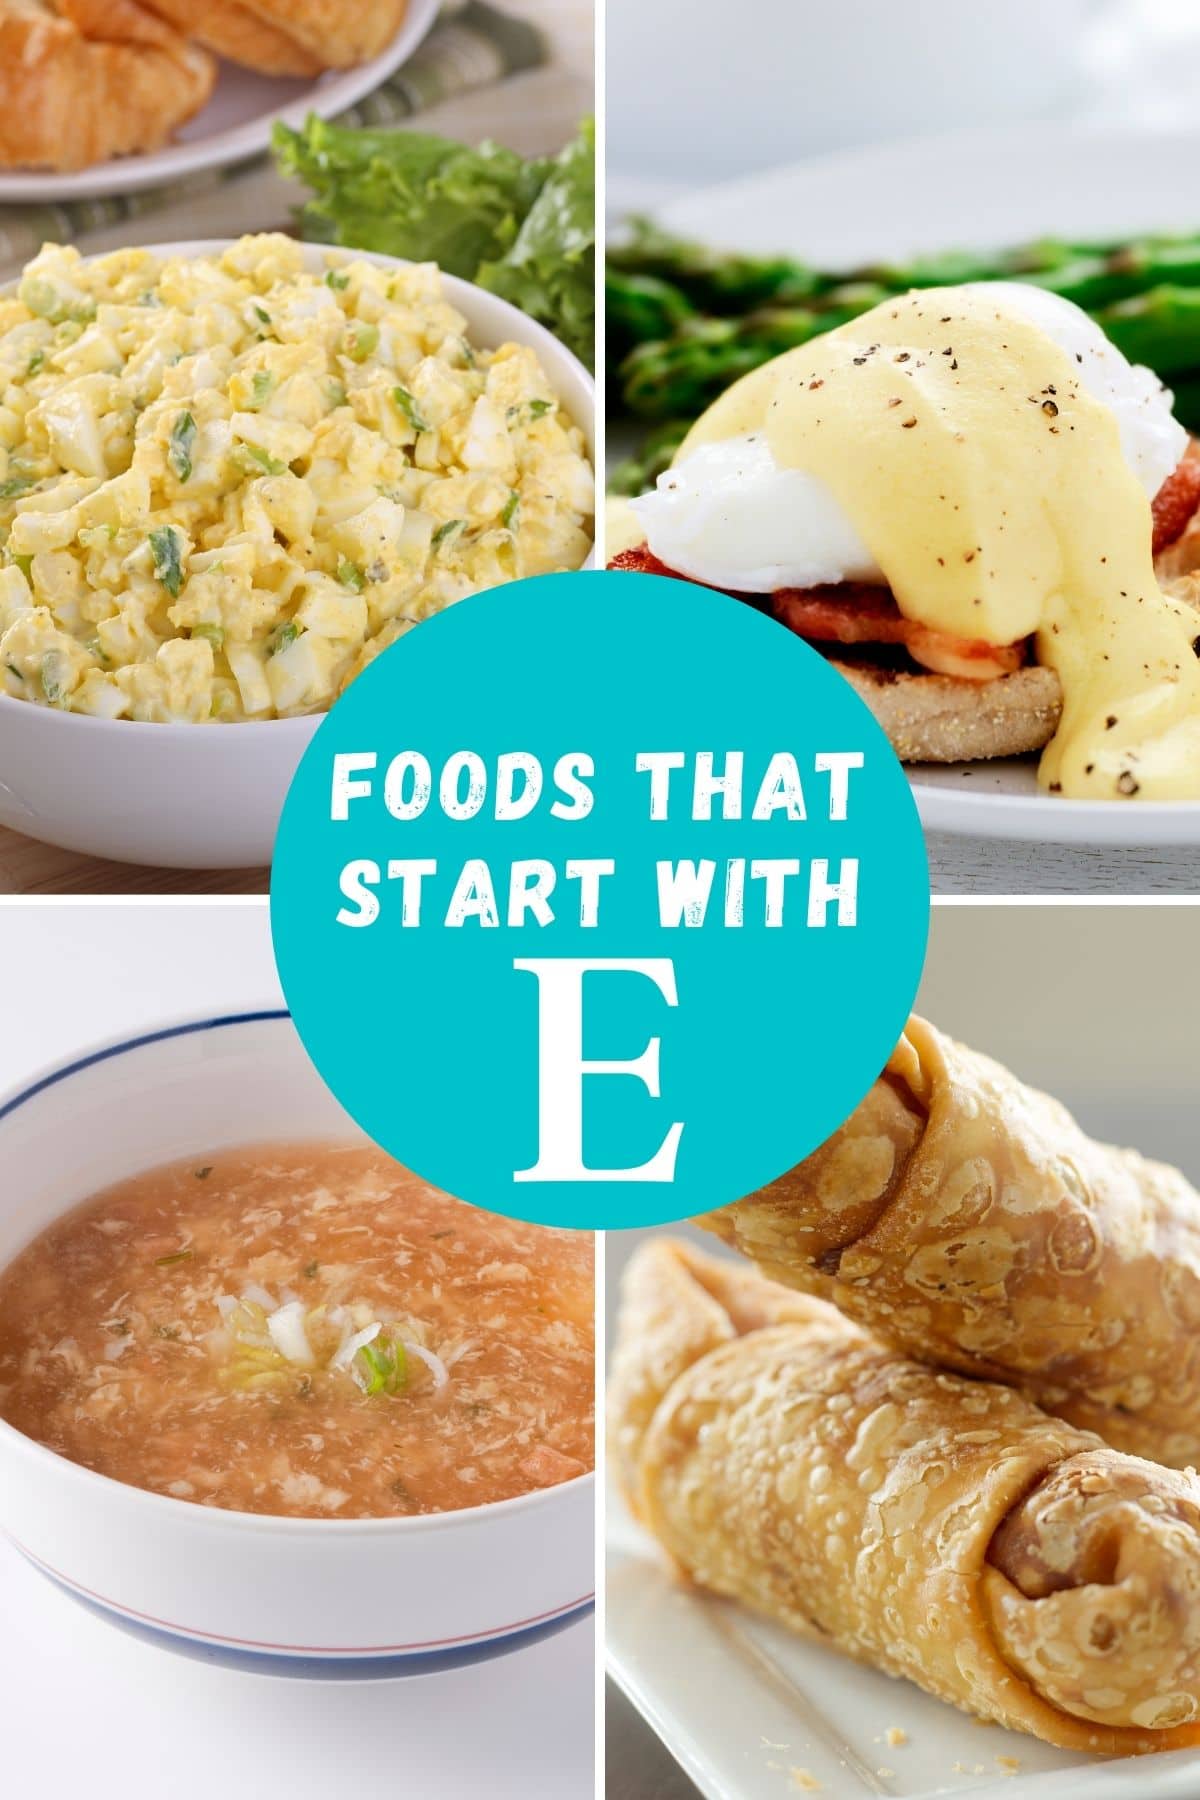 Food that starts with E